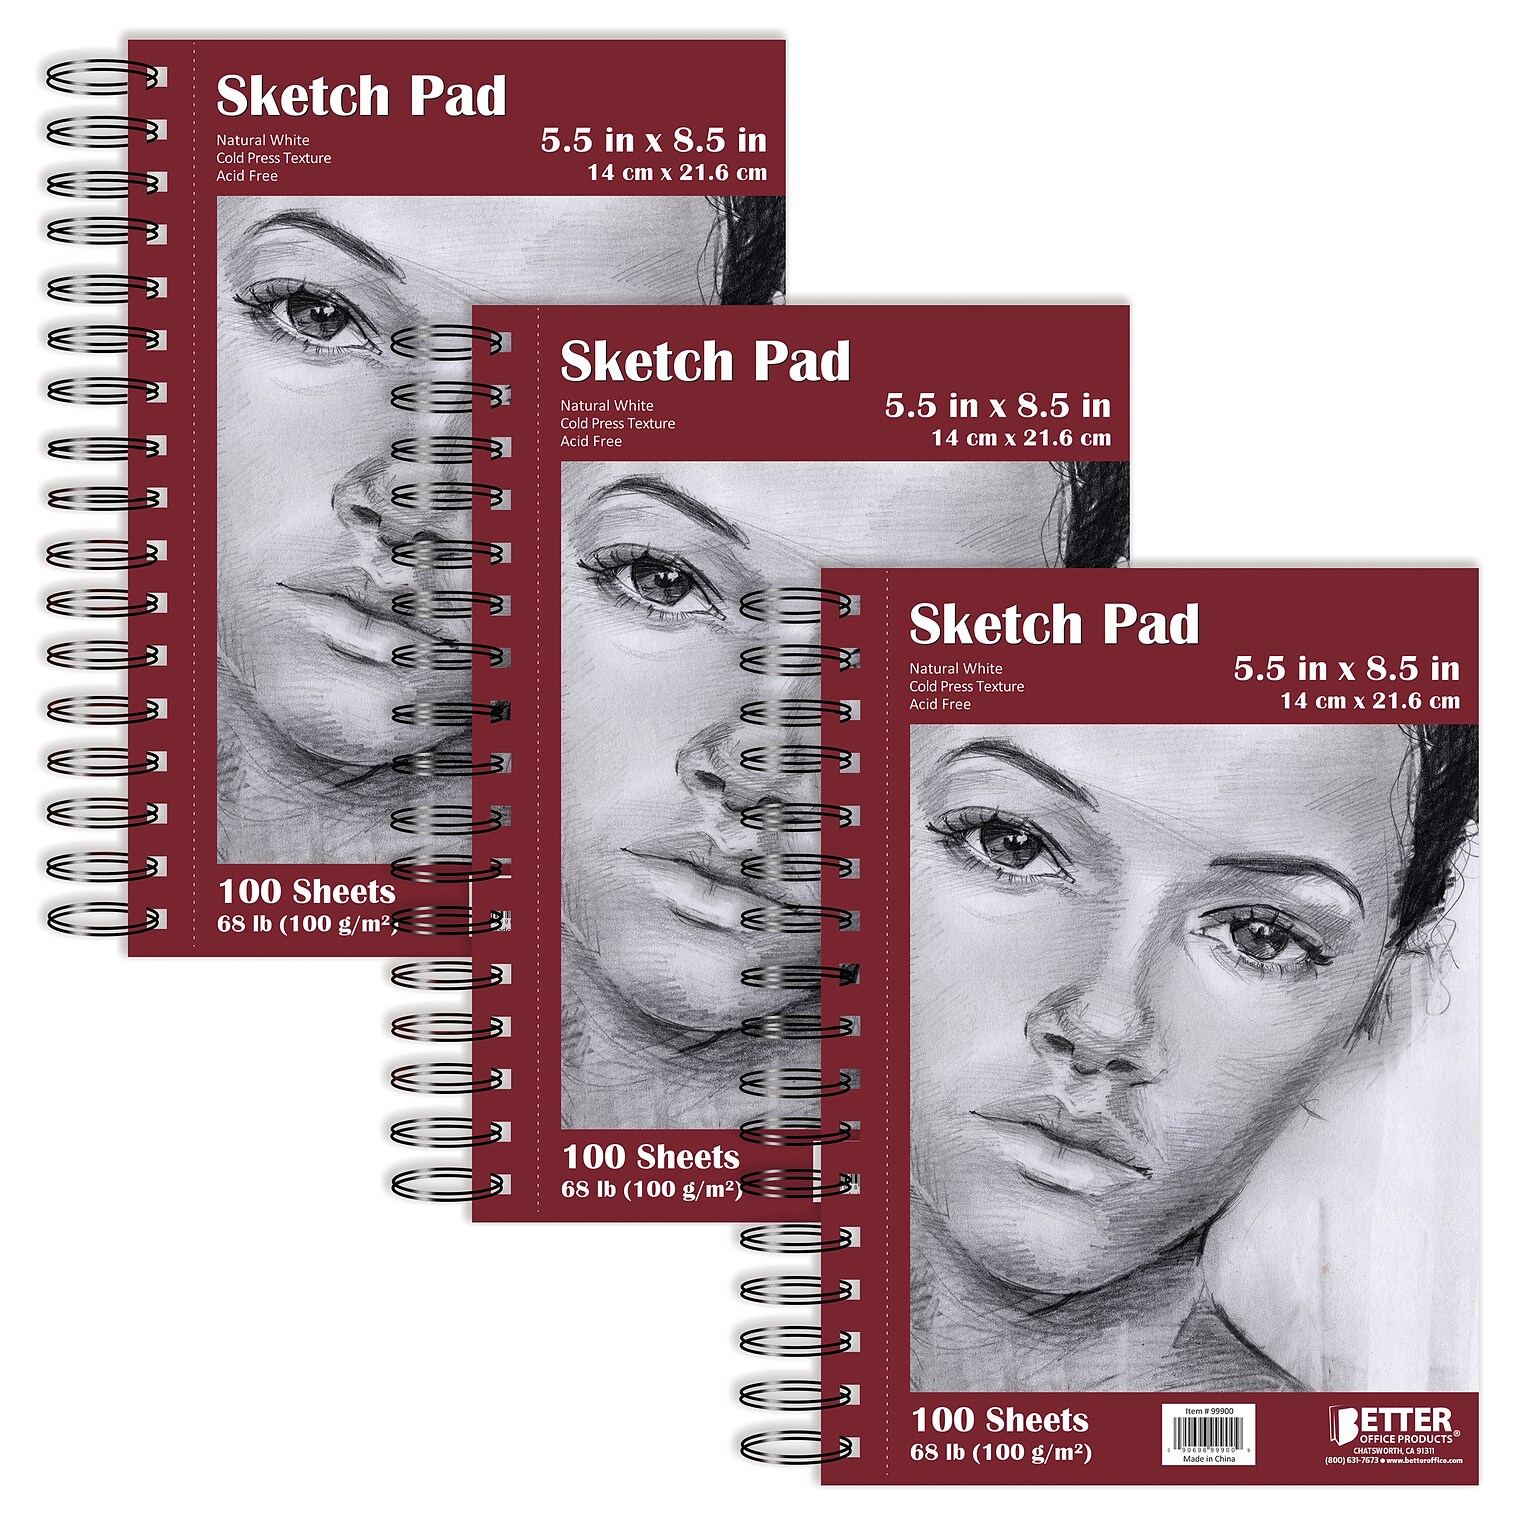 Better Office Products Spiral Bound Artist Sketch Book, 5.5 x 8.5, 100 Sheets Per Pad, Natural White, 3-Pack (01300-3PK)